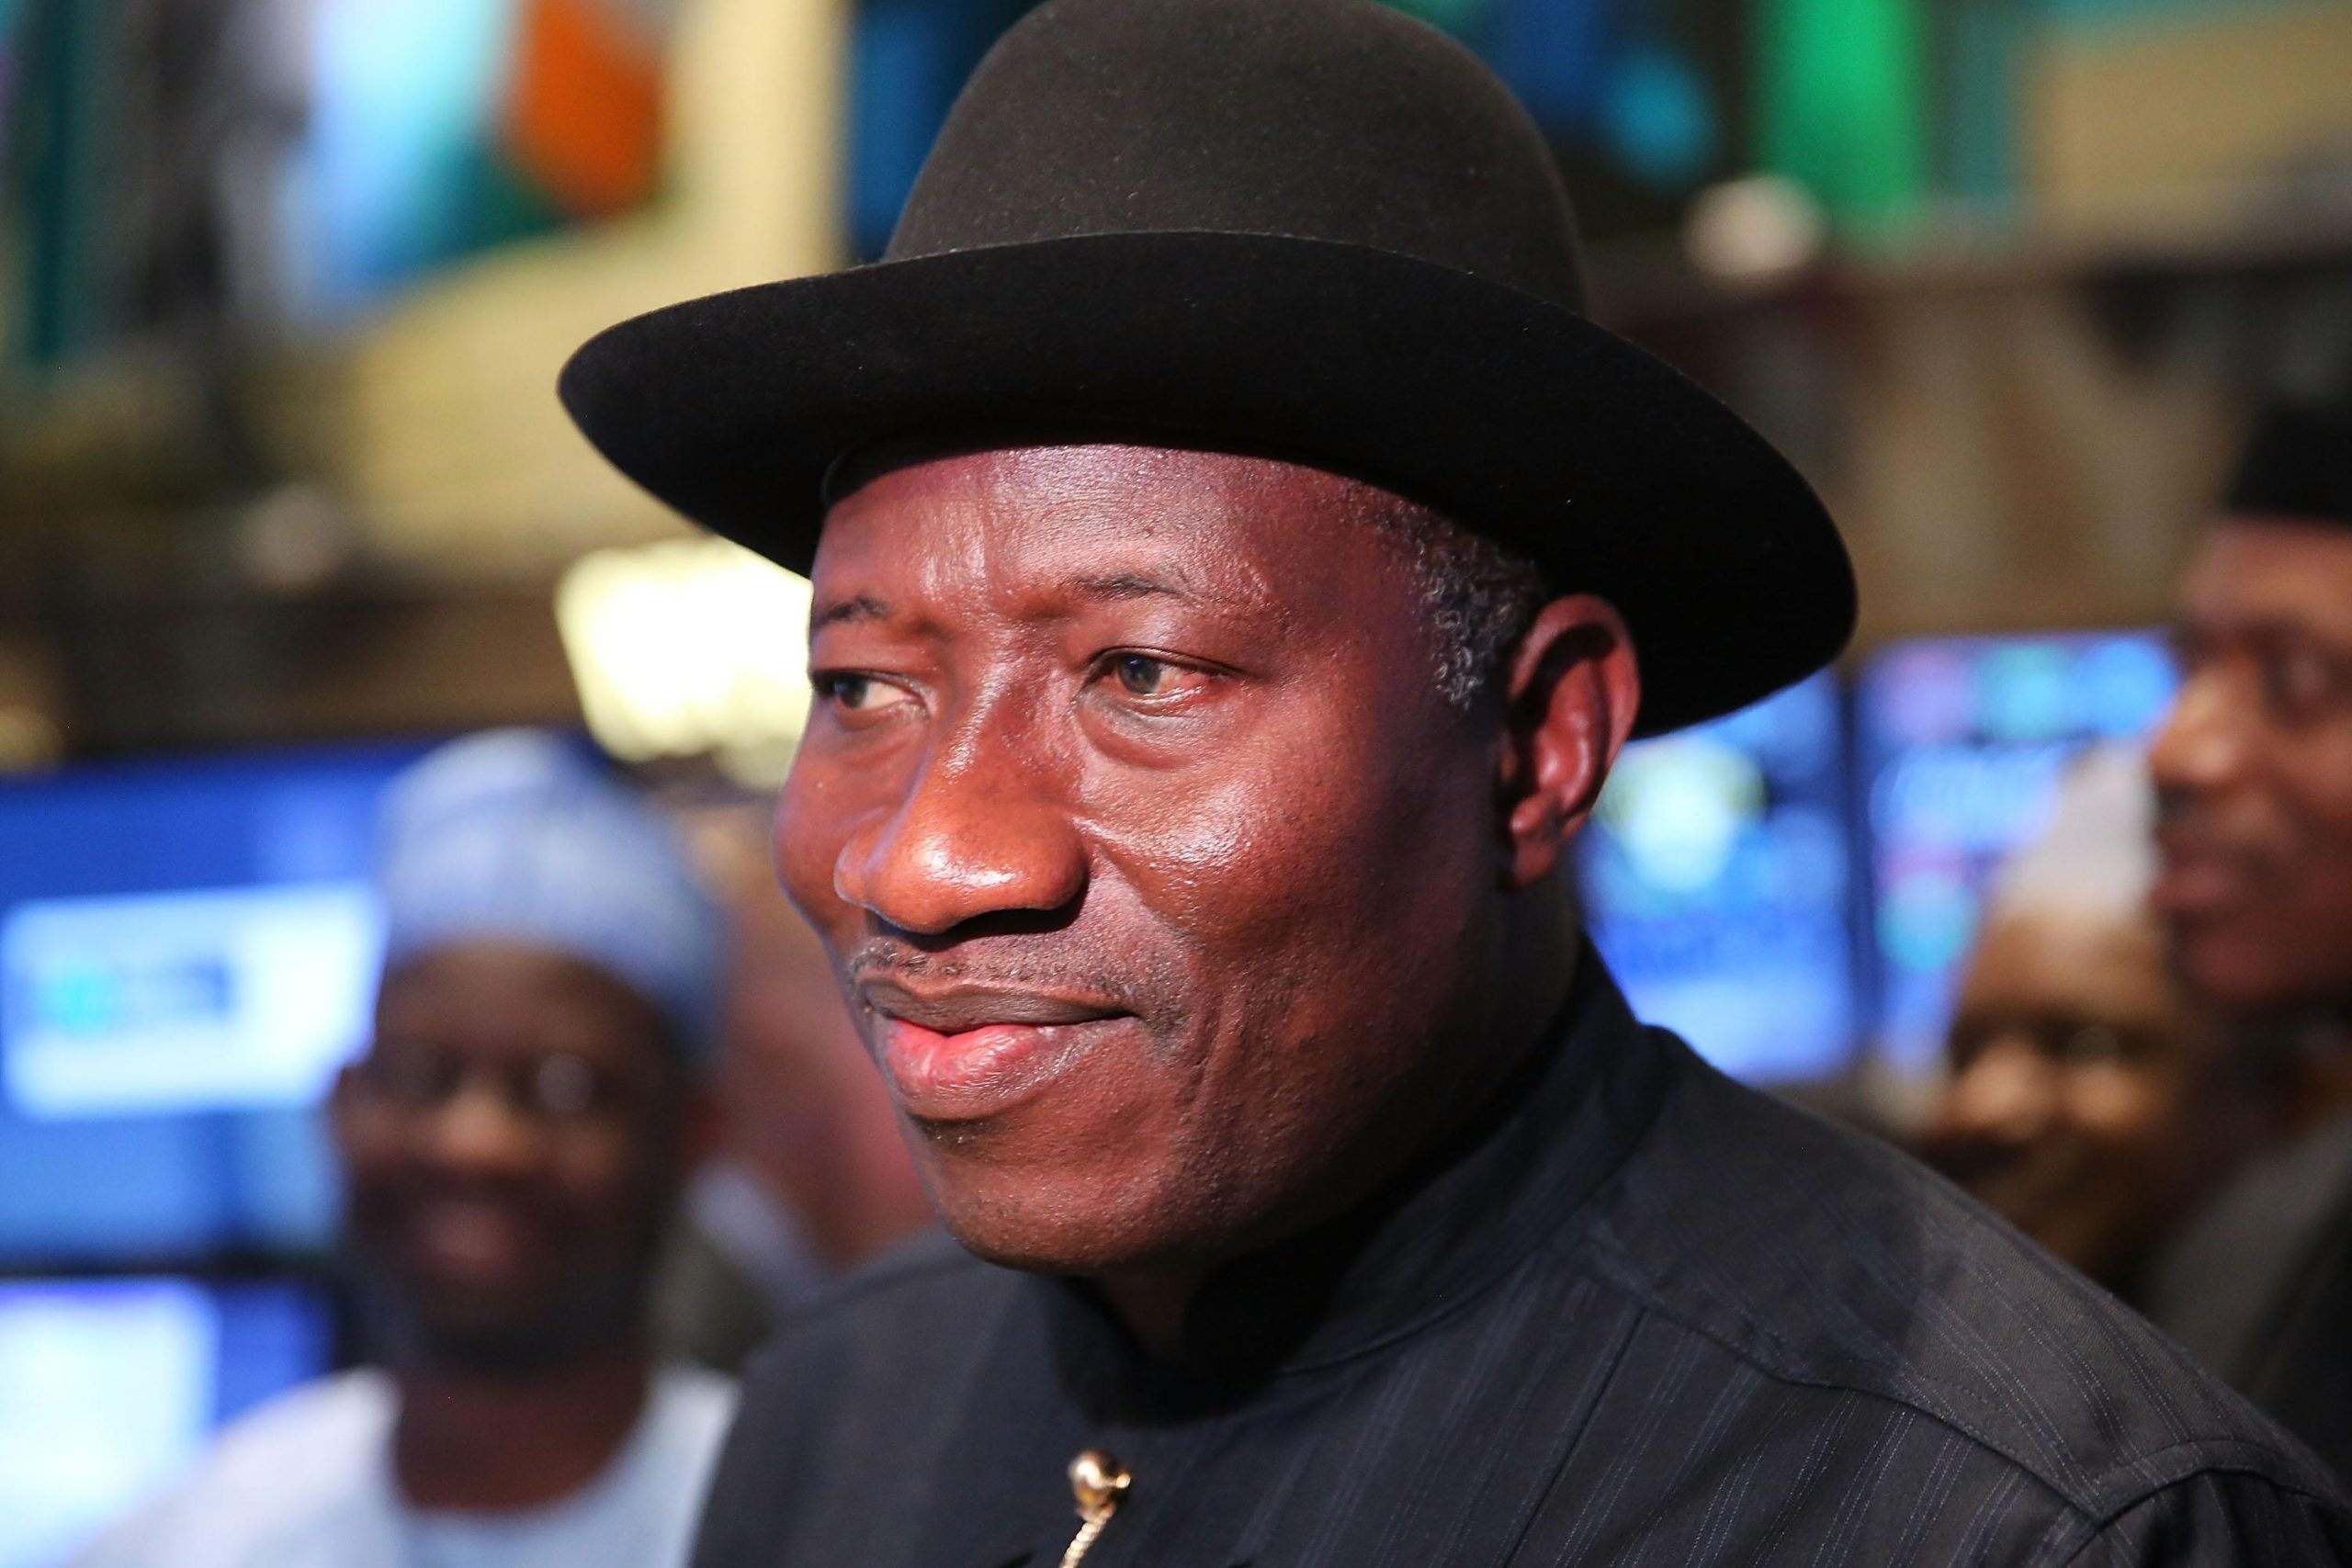 We get so blinded when we get political power - Jonathan